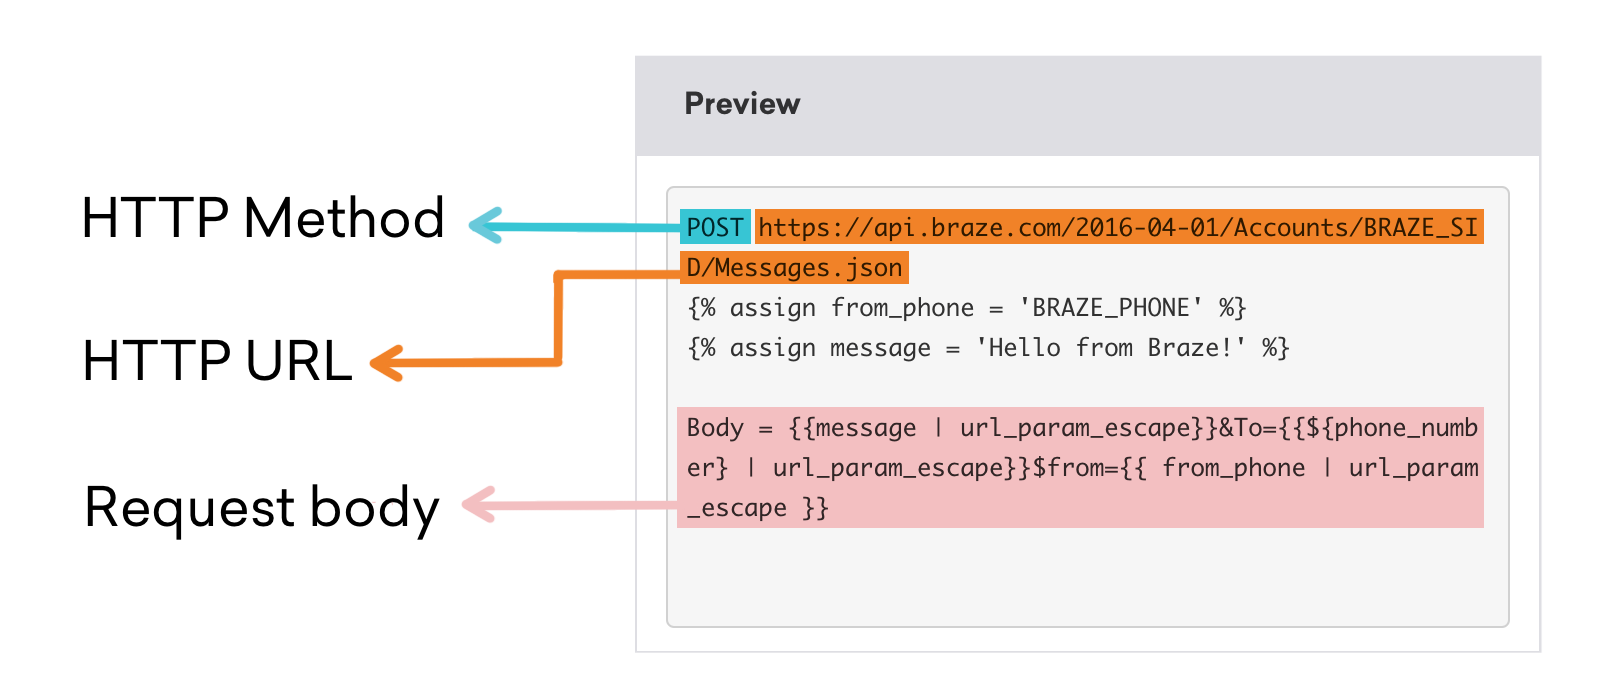 Example webhook broken out into HTTP method, HTTP URL, and request body. See the following table for details.